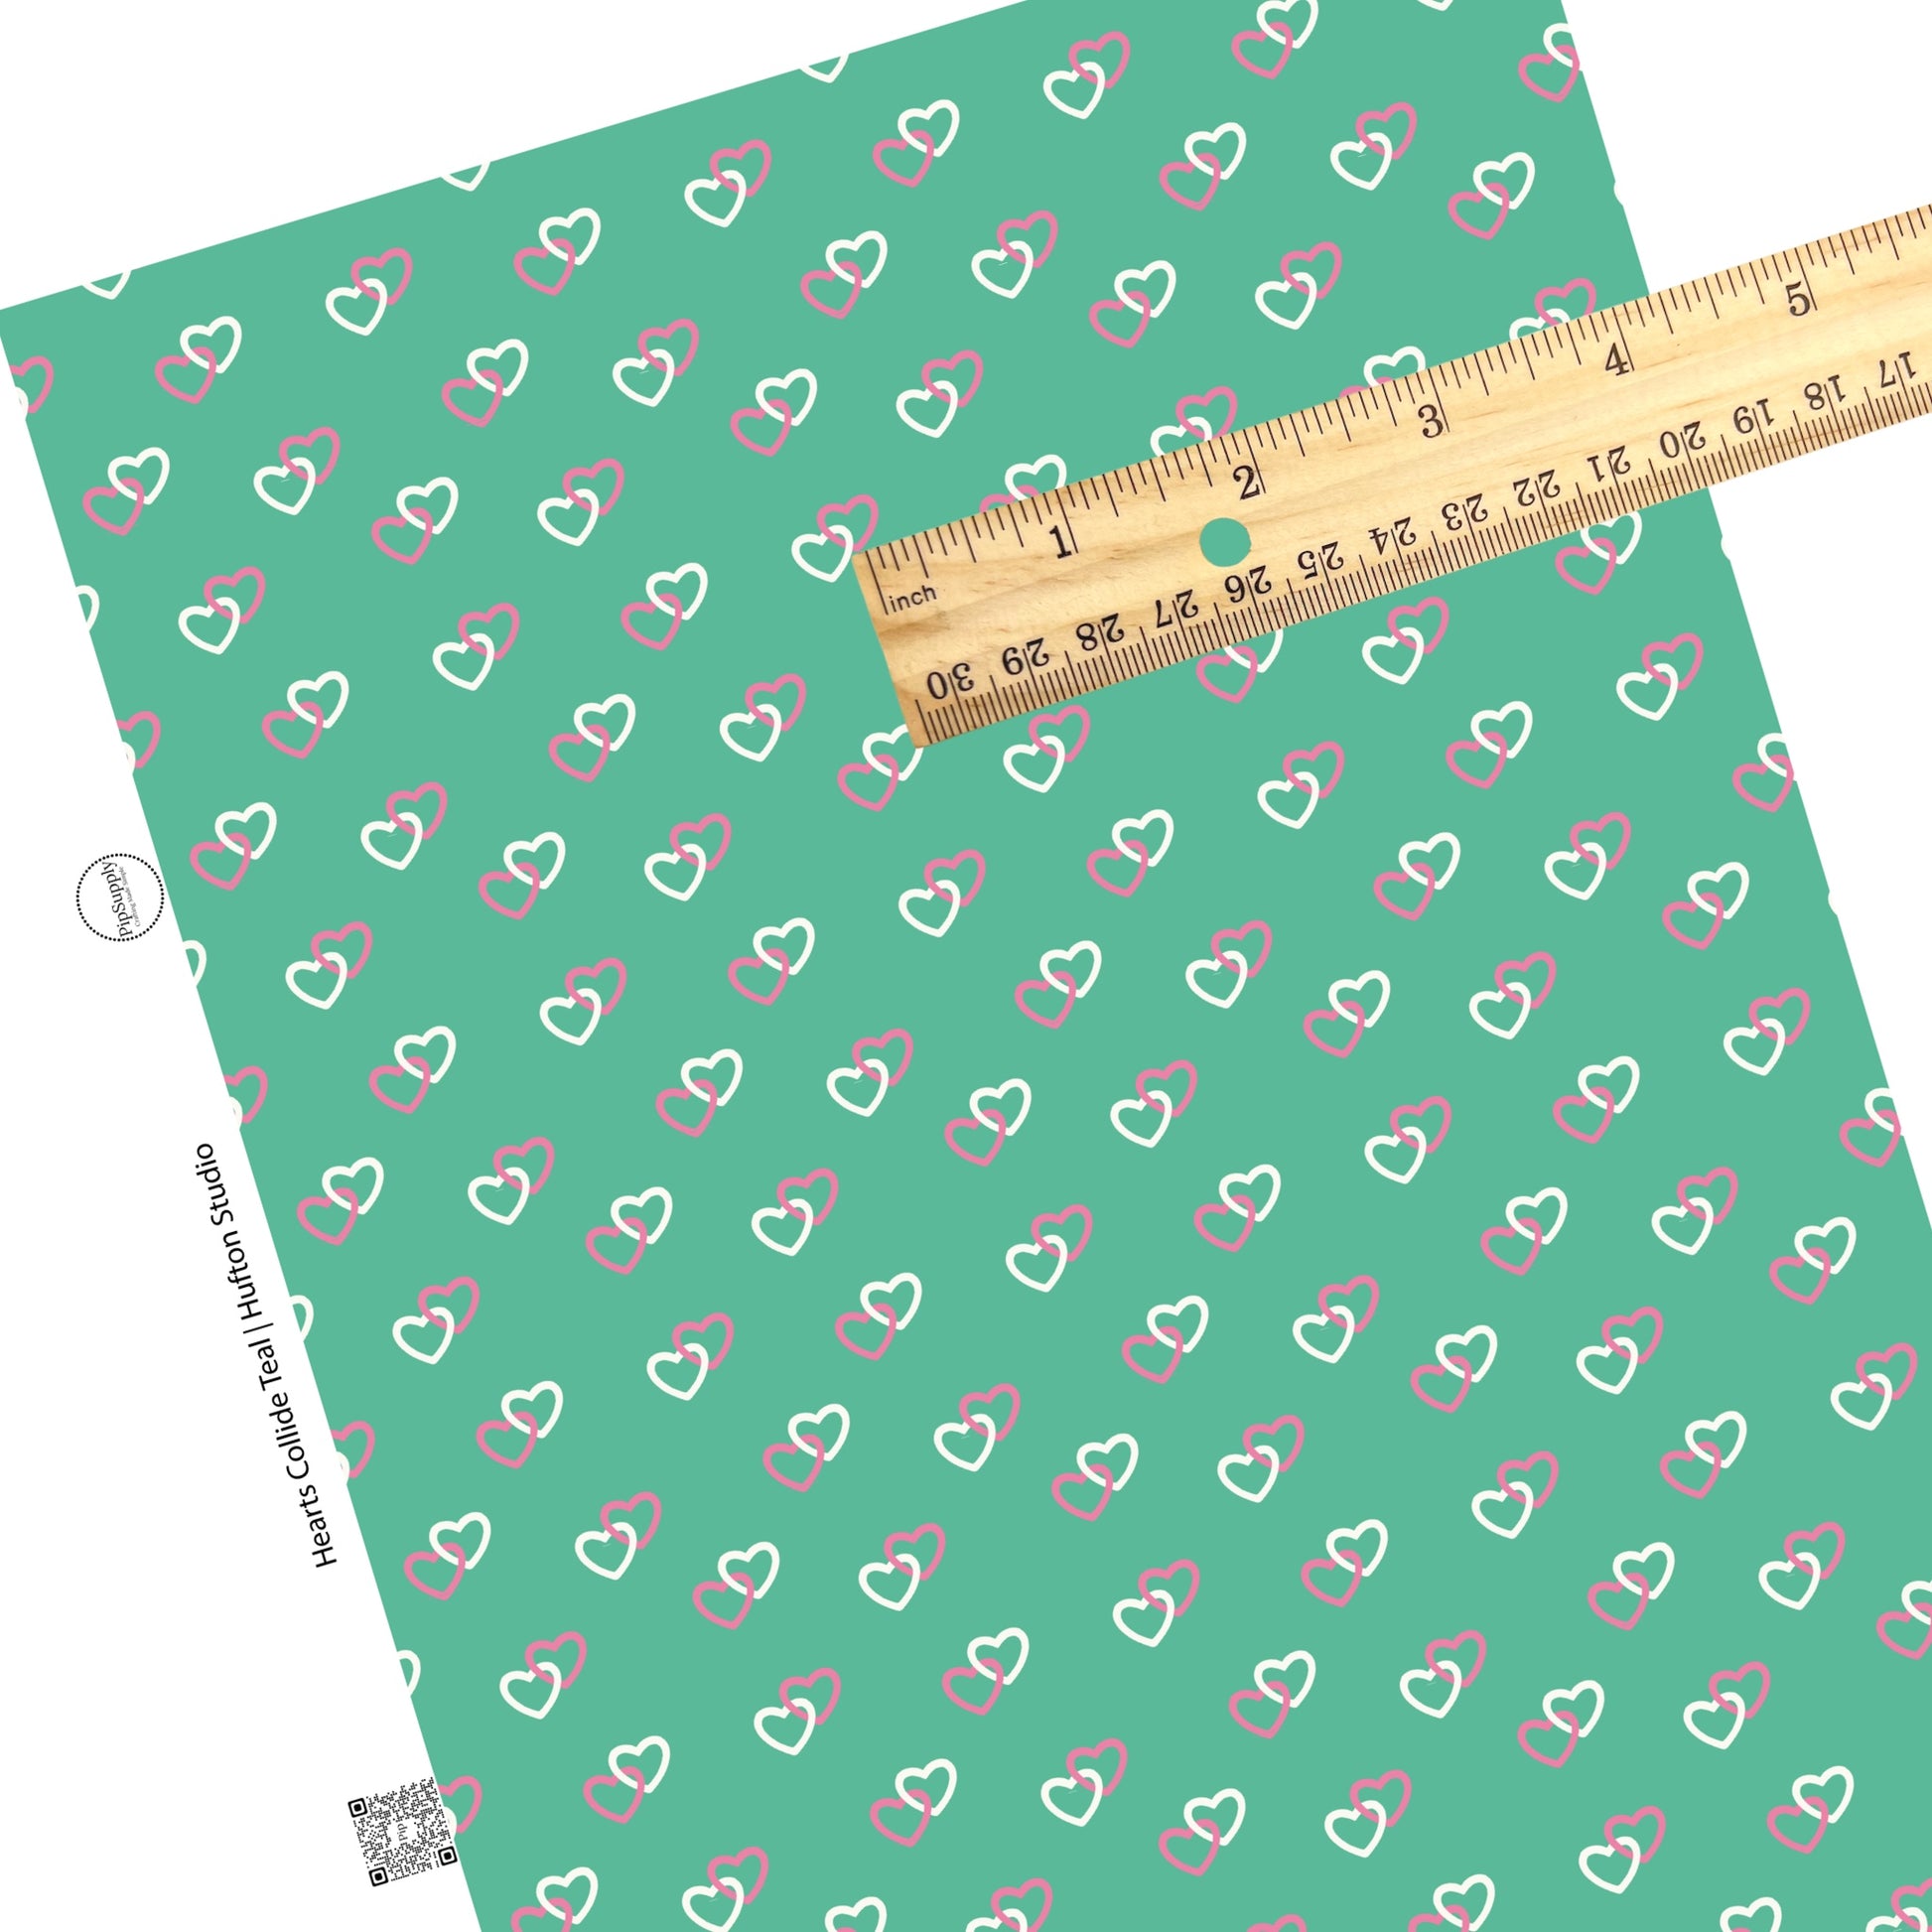 Hot pink and white hearts connected on teal green faux leather sheet